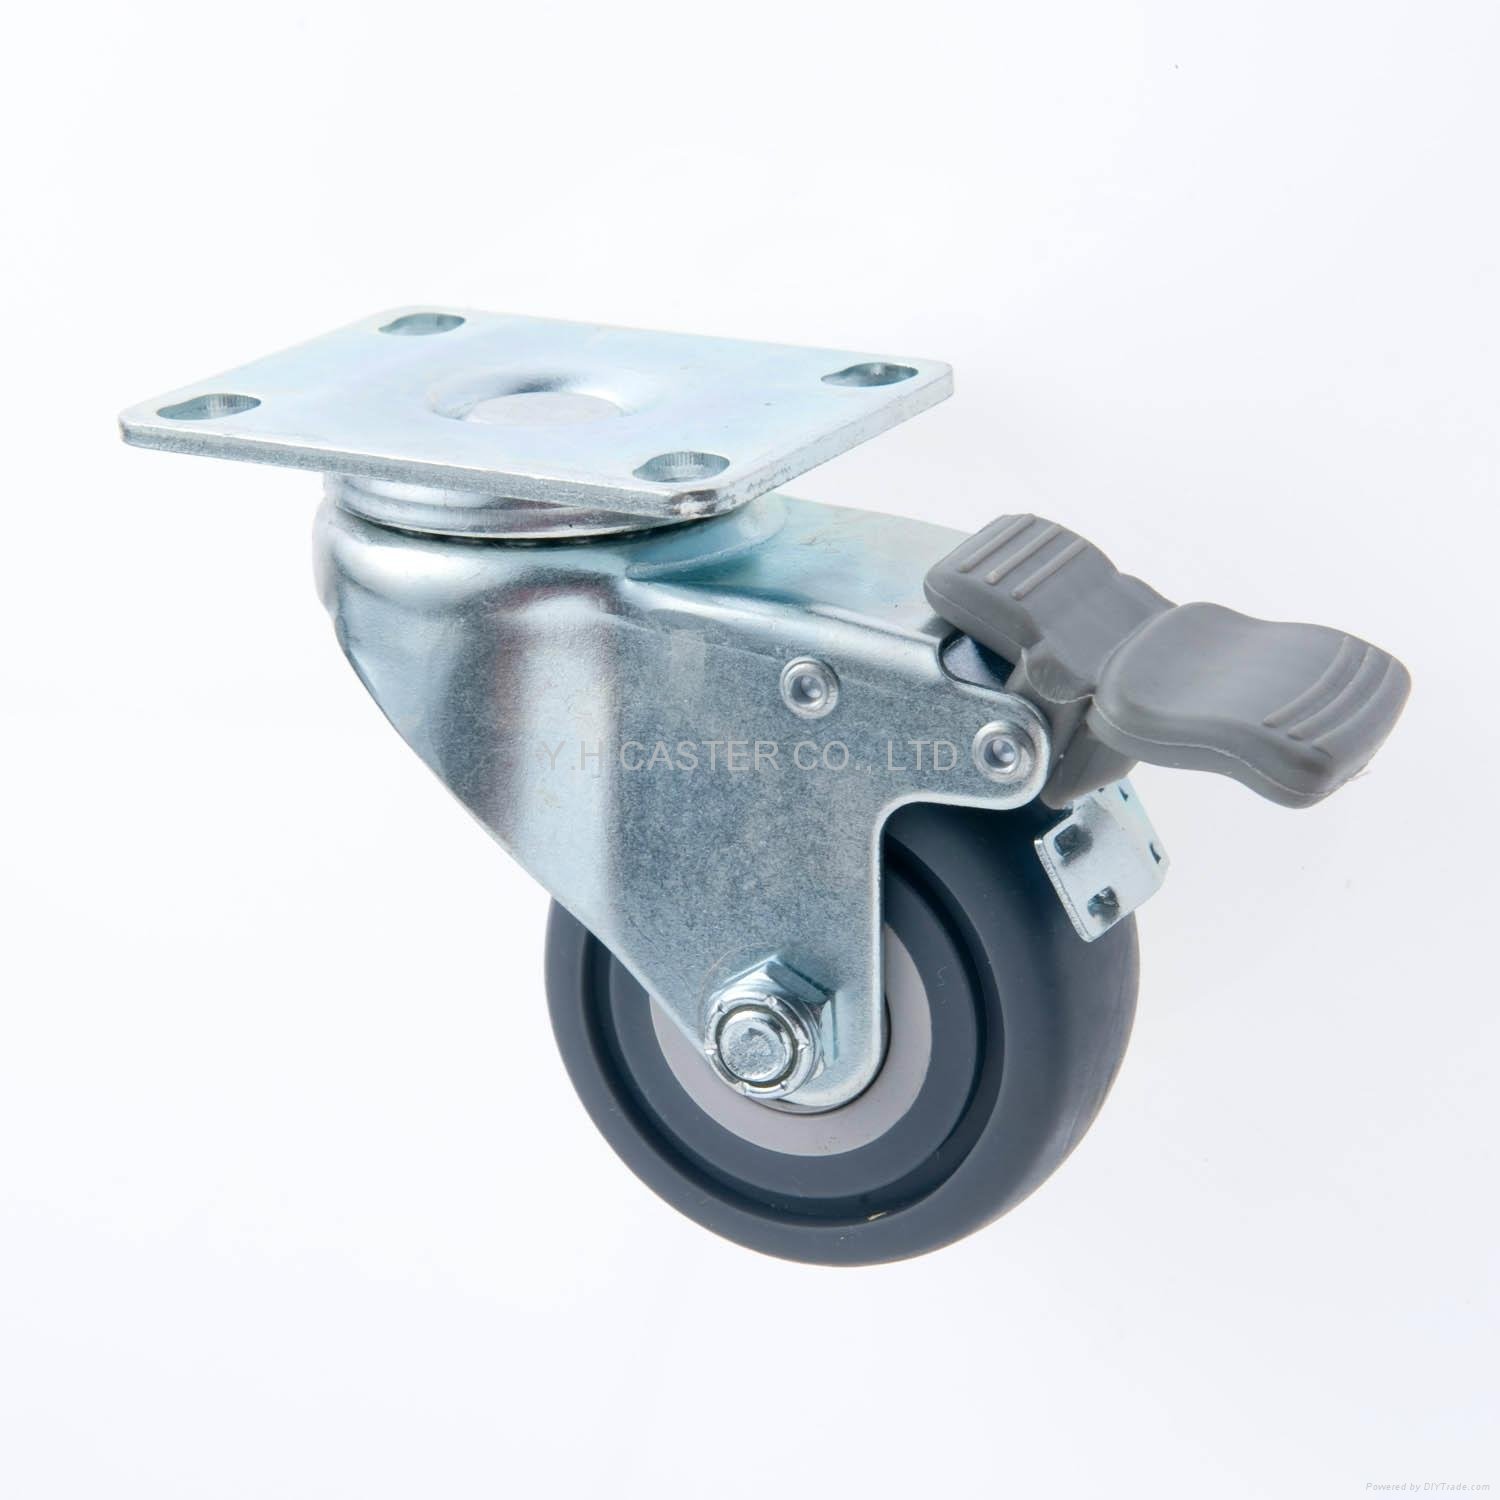 25 Series 2.5" TPR Caster (Plate with Brake) 2